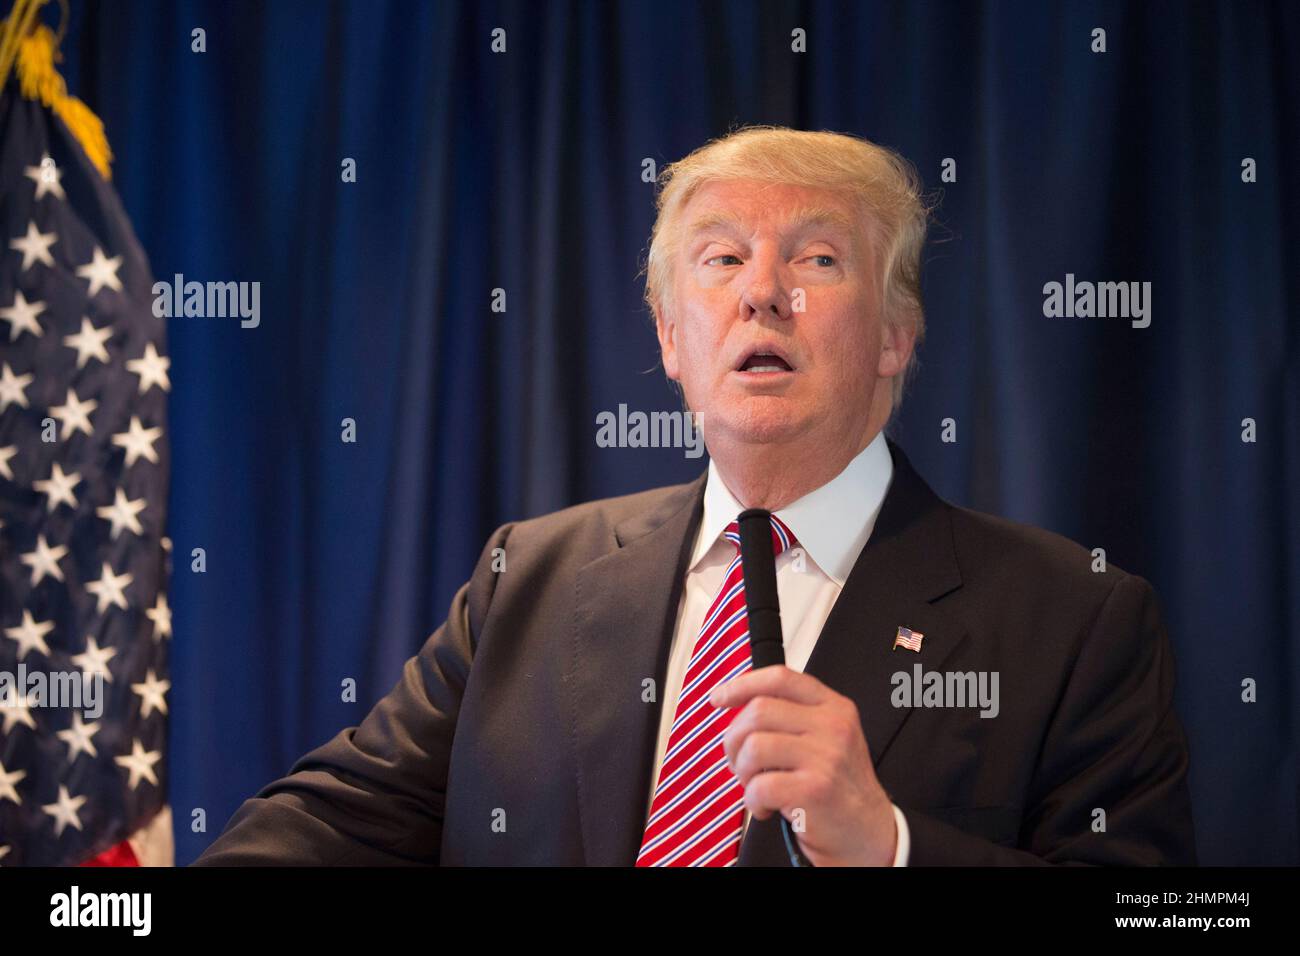 Austin Texas USA, August 23, 2016: Republican presidential nominee DONALD TRUMP speaks at a private fundraiser during a swing through heavily Democratic central Texas. ©Bob Daemmrich Stock Photo